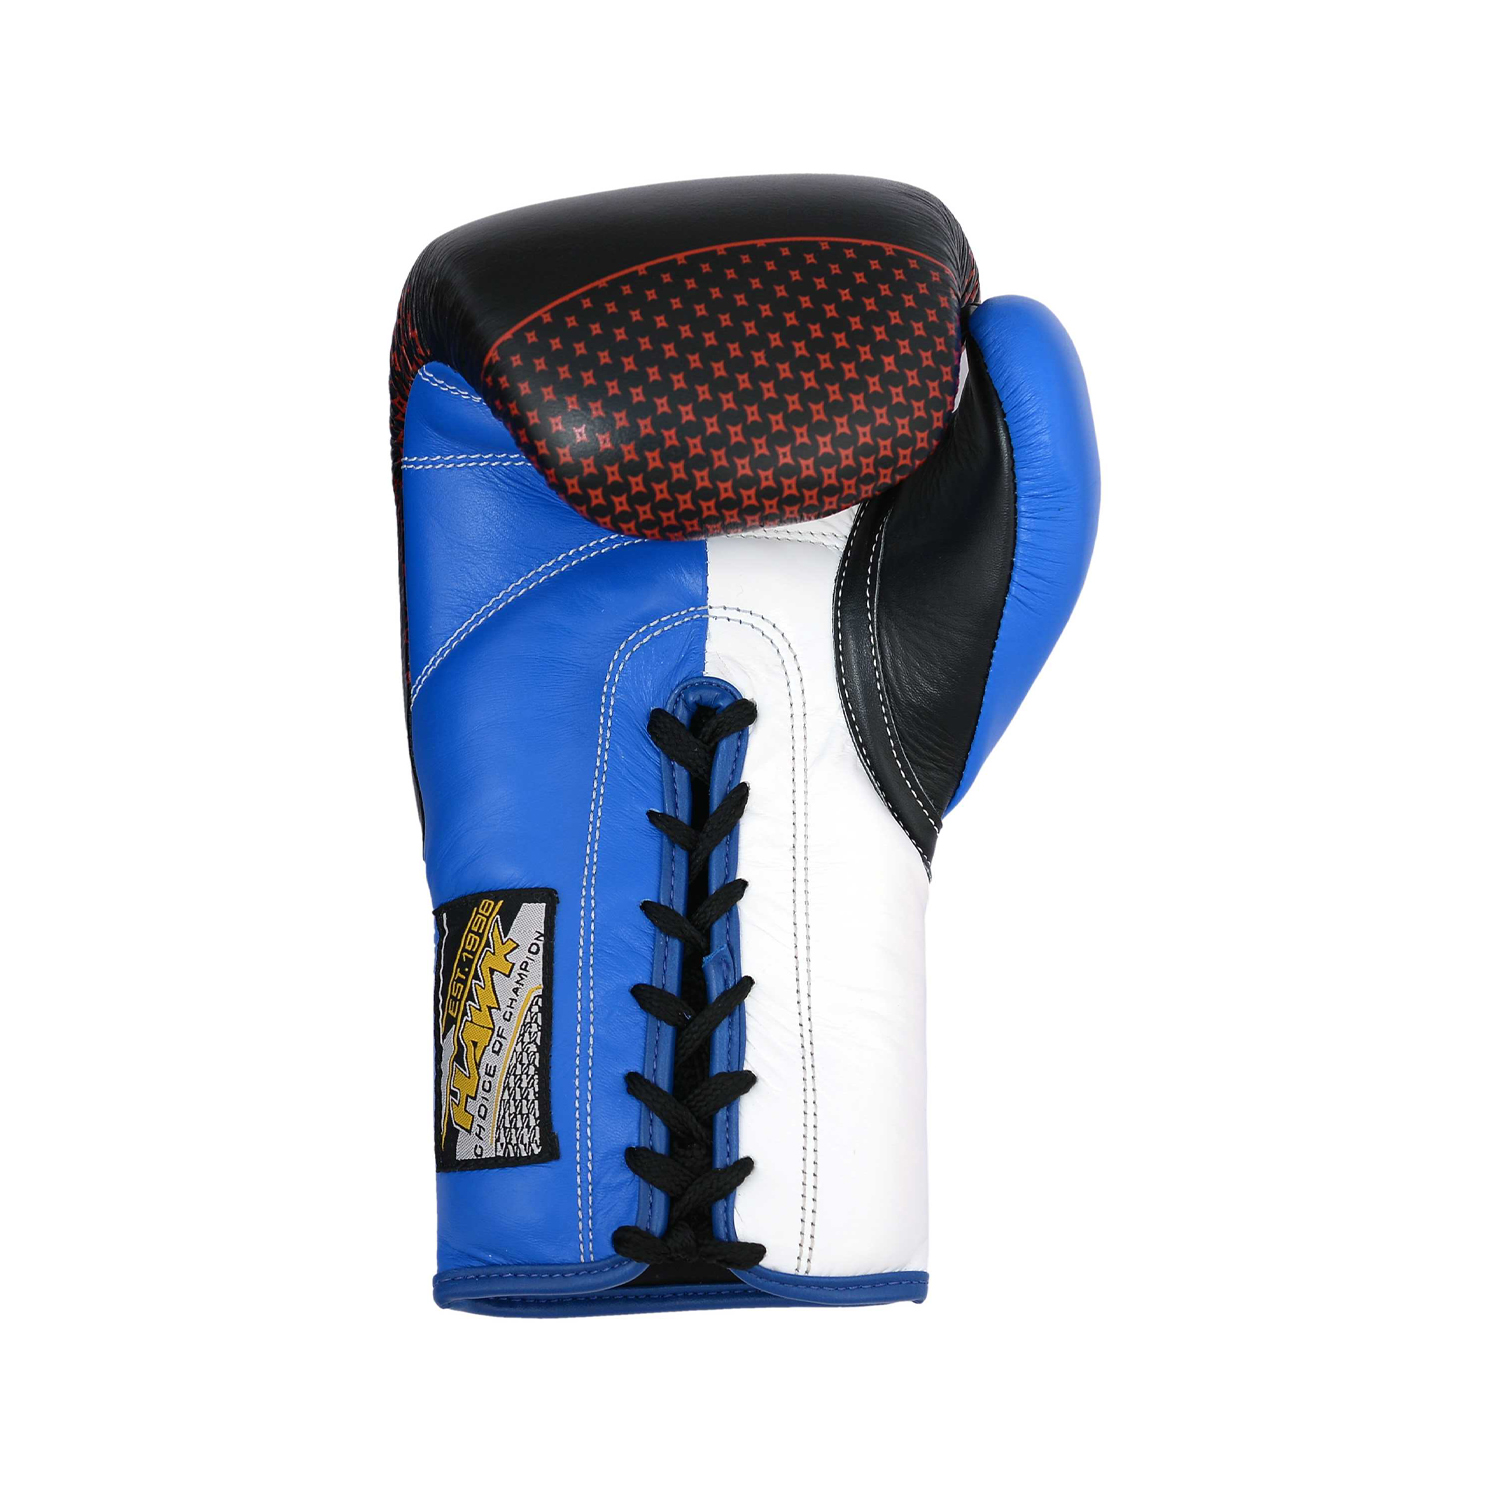 Hawk Boxing Lace Up Gloves, Traditional Training Hook Loop Gloves ...